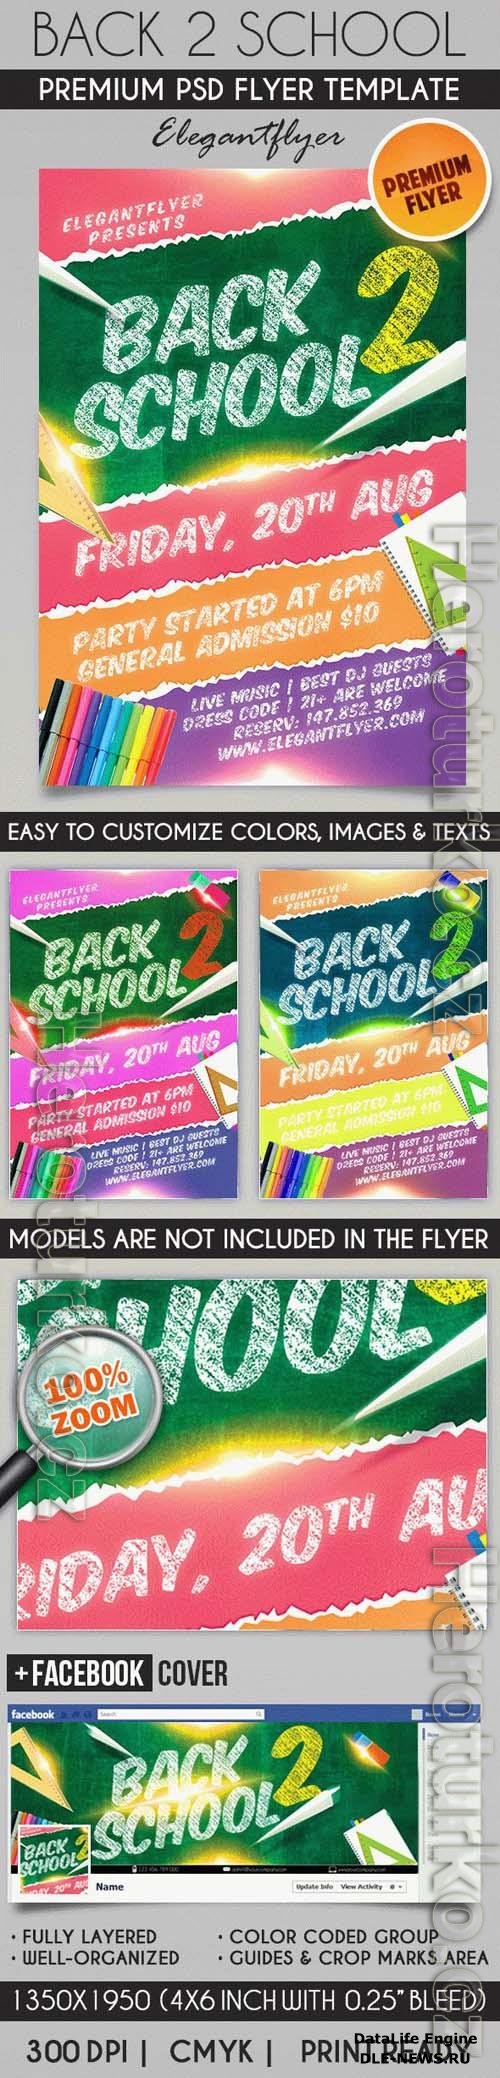 Party for Going Back to School  PSD Flyer